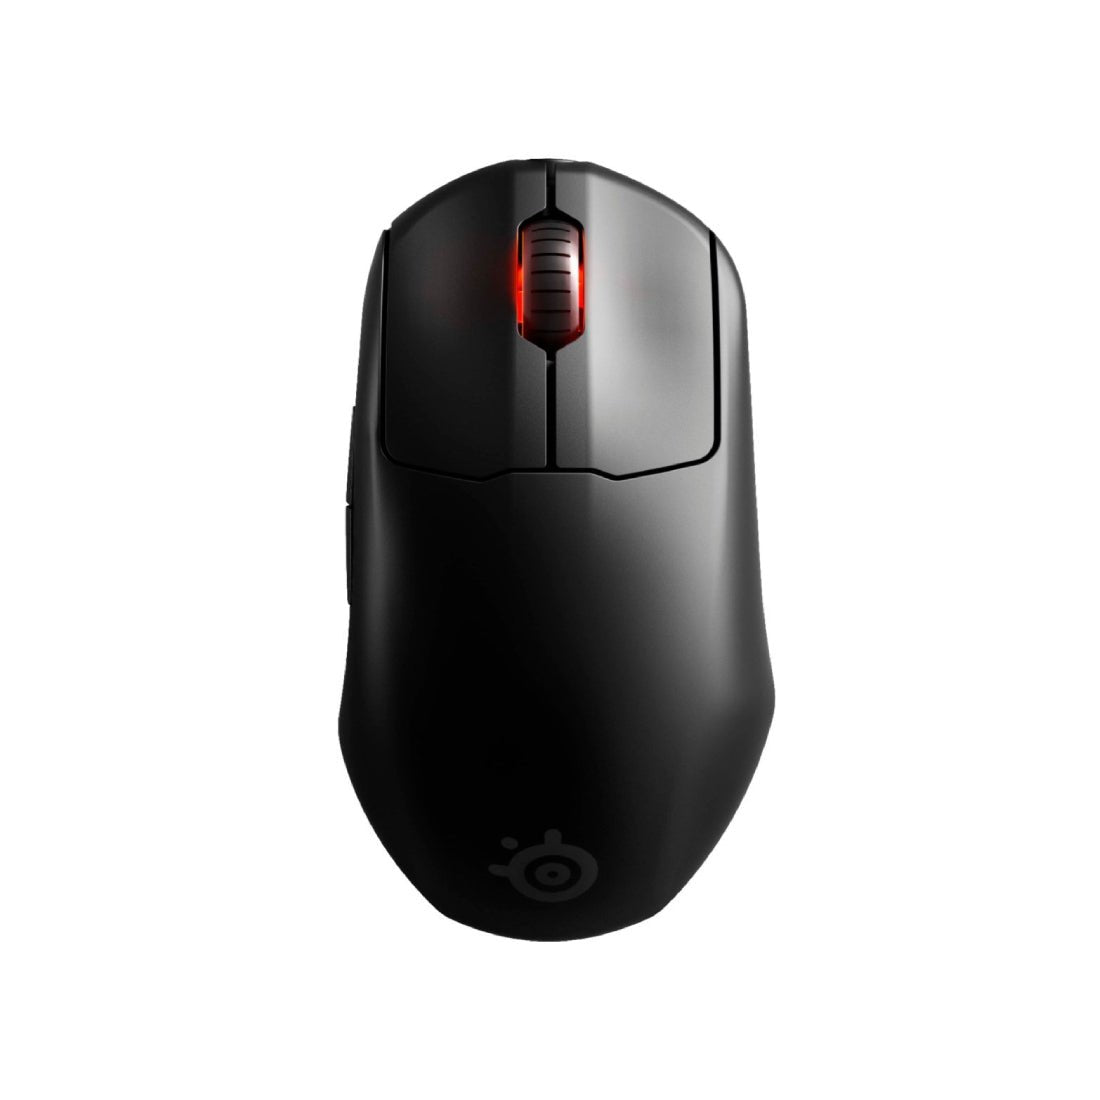 SteelSeries Prime Wireless RGB Gaming Mouse - Black - فأرة - Store 974 | ستور ٩٧٤